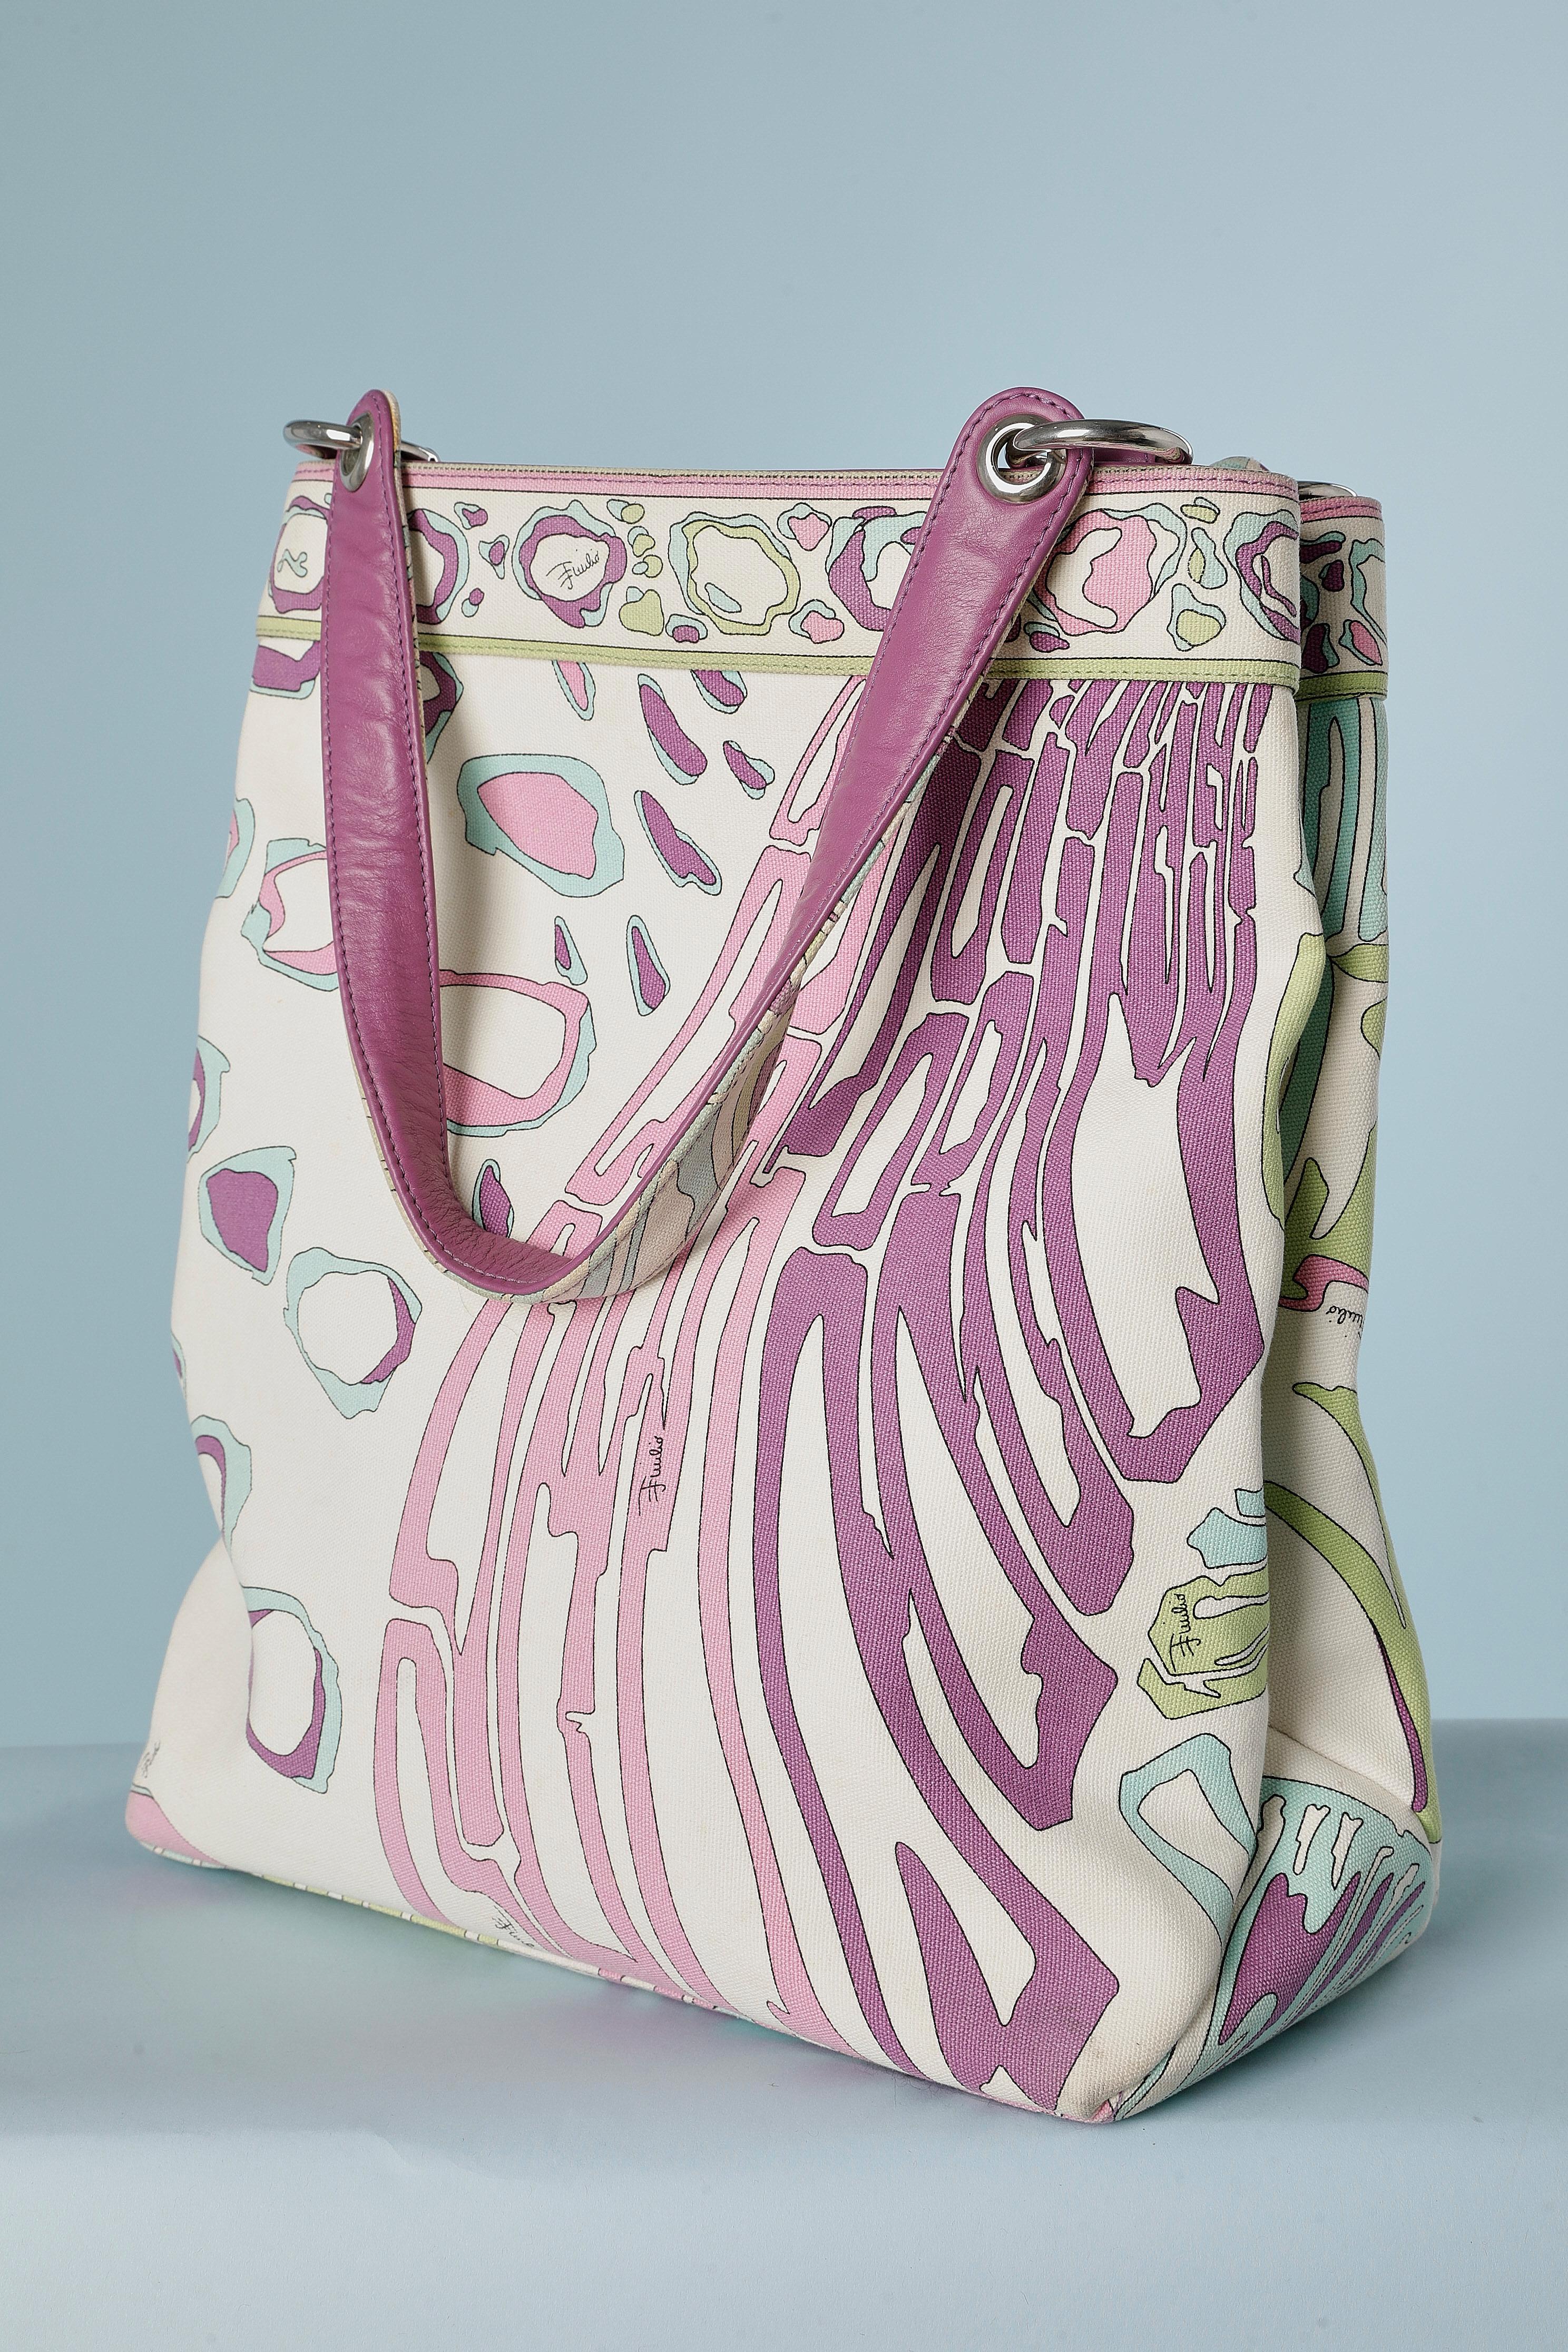 Printed and branded canvas hand-bag Emilio Pucci  In Excellent Condition For Sale In Saint-Ouen-Sur-Seine, FR